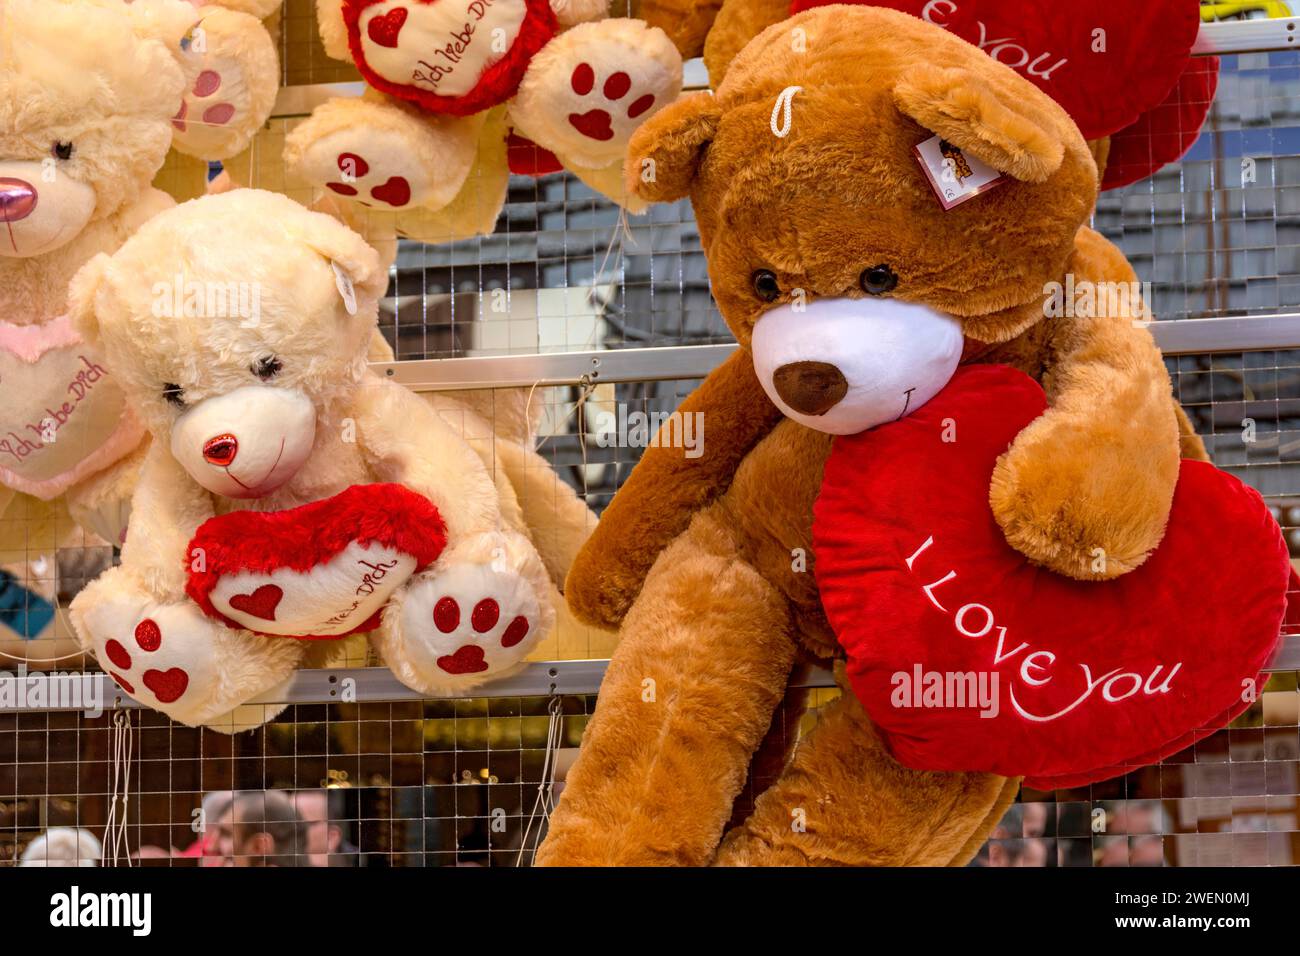 Teddy bears, cuddly toys with heart, I love you, I love you, prizes, raffle prizes, lucky draw, lottery stand, lottery booth at fairground Kalter Stock Photo